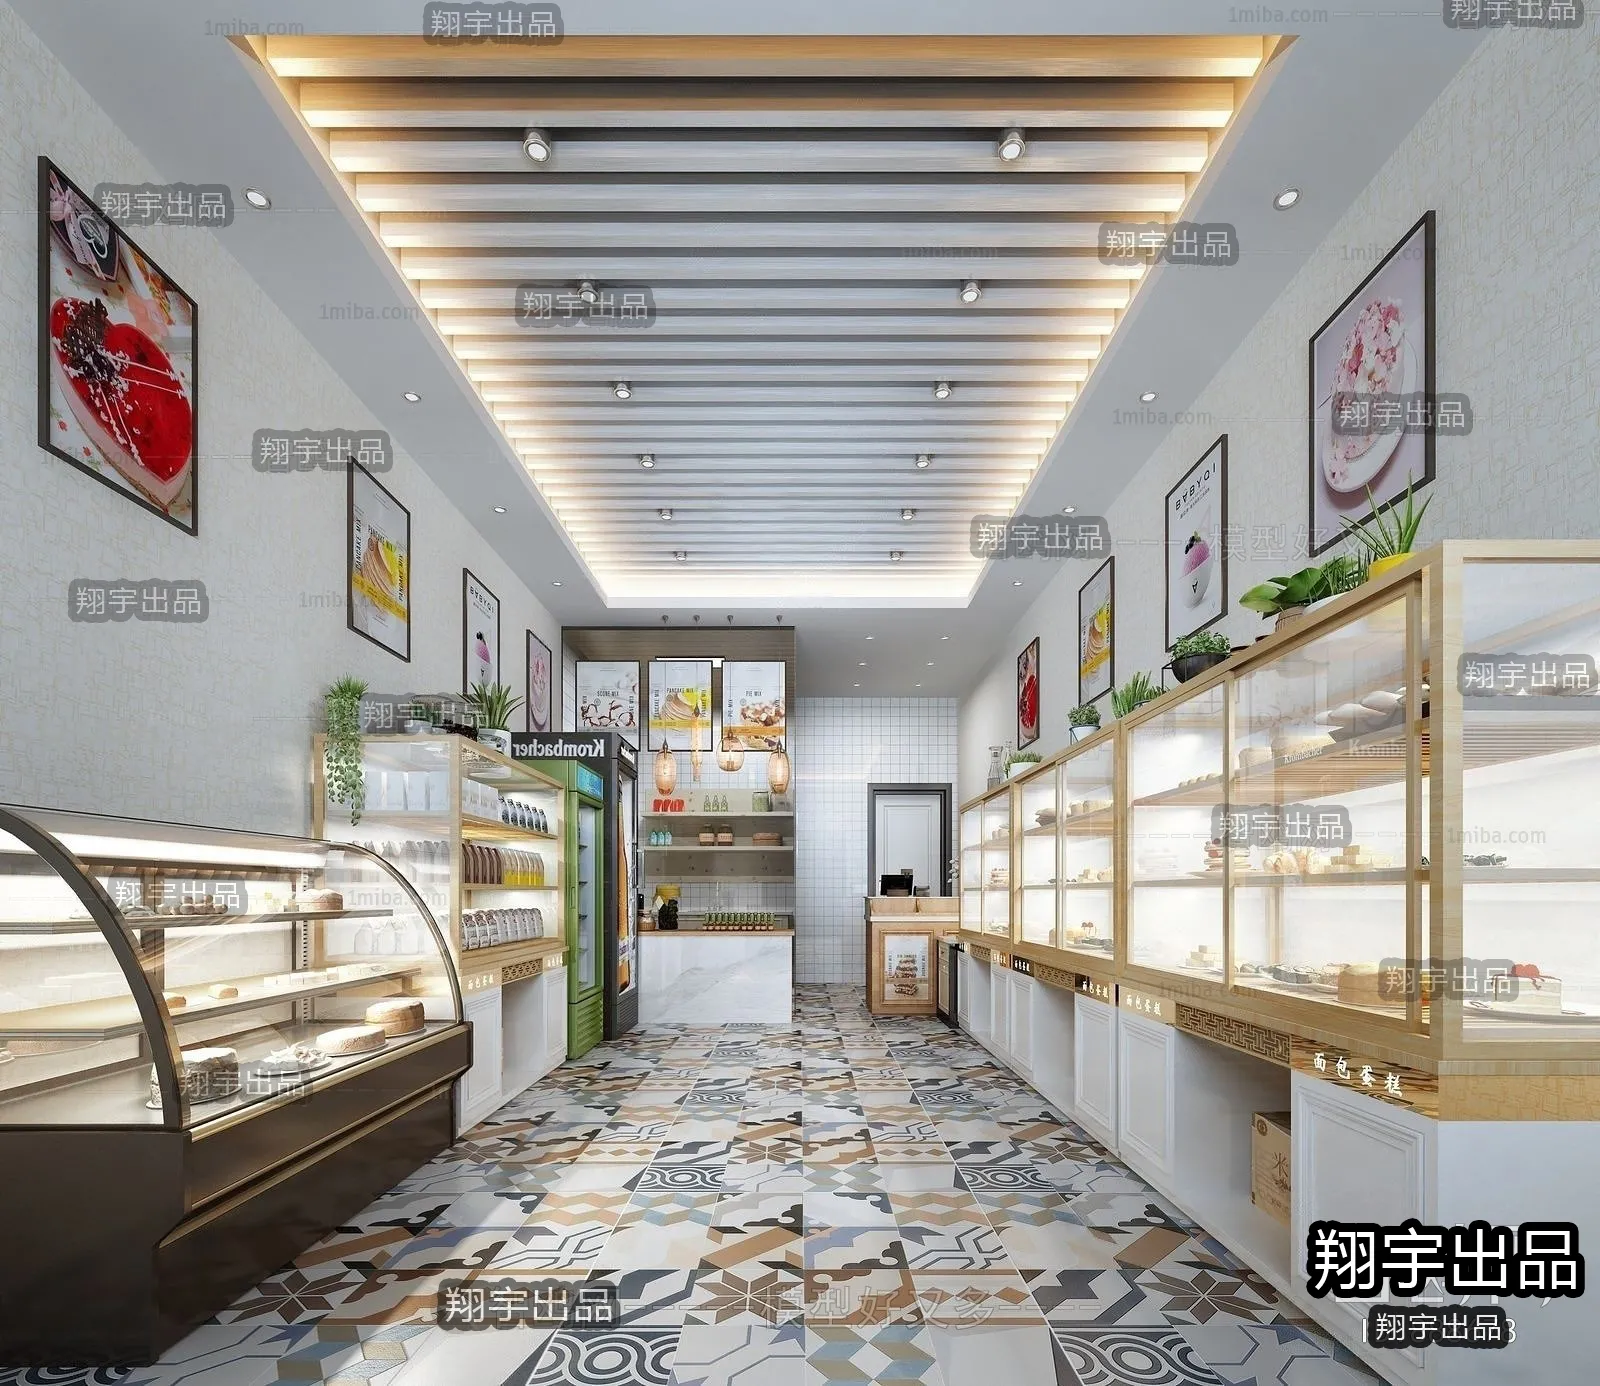 FASTFOOD STORE – 3D SCENES – 0132